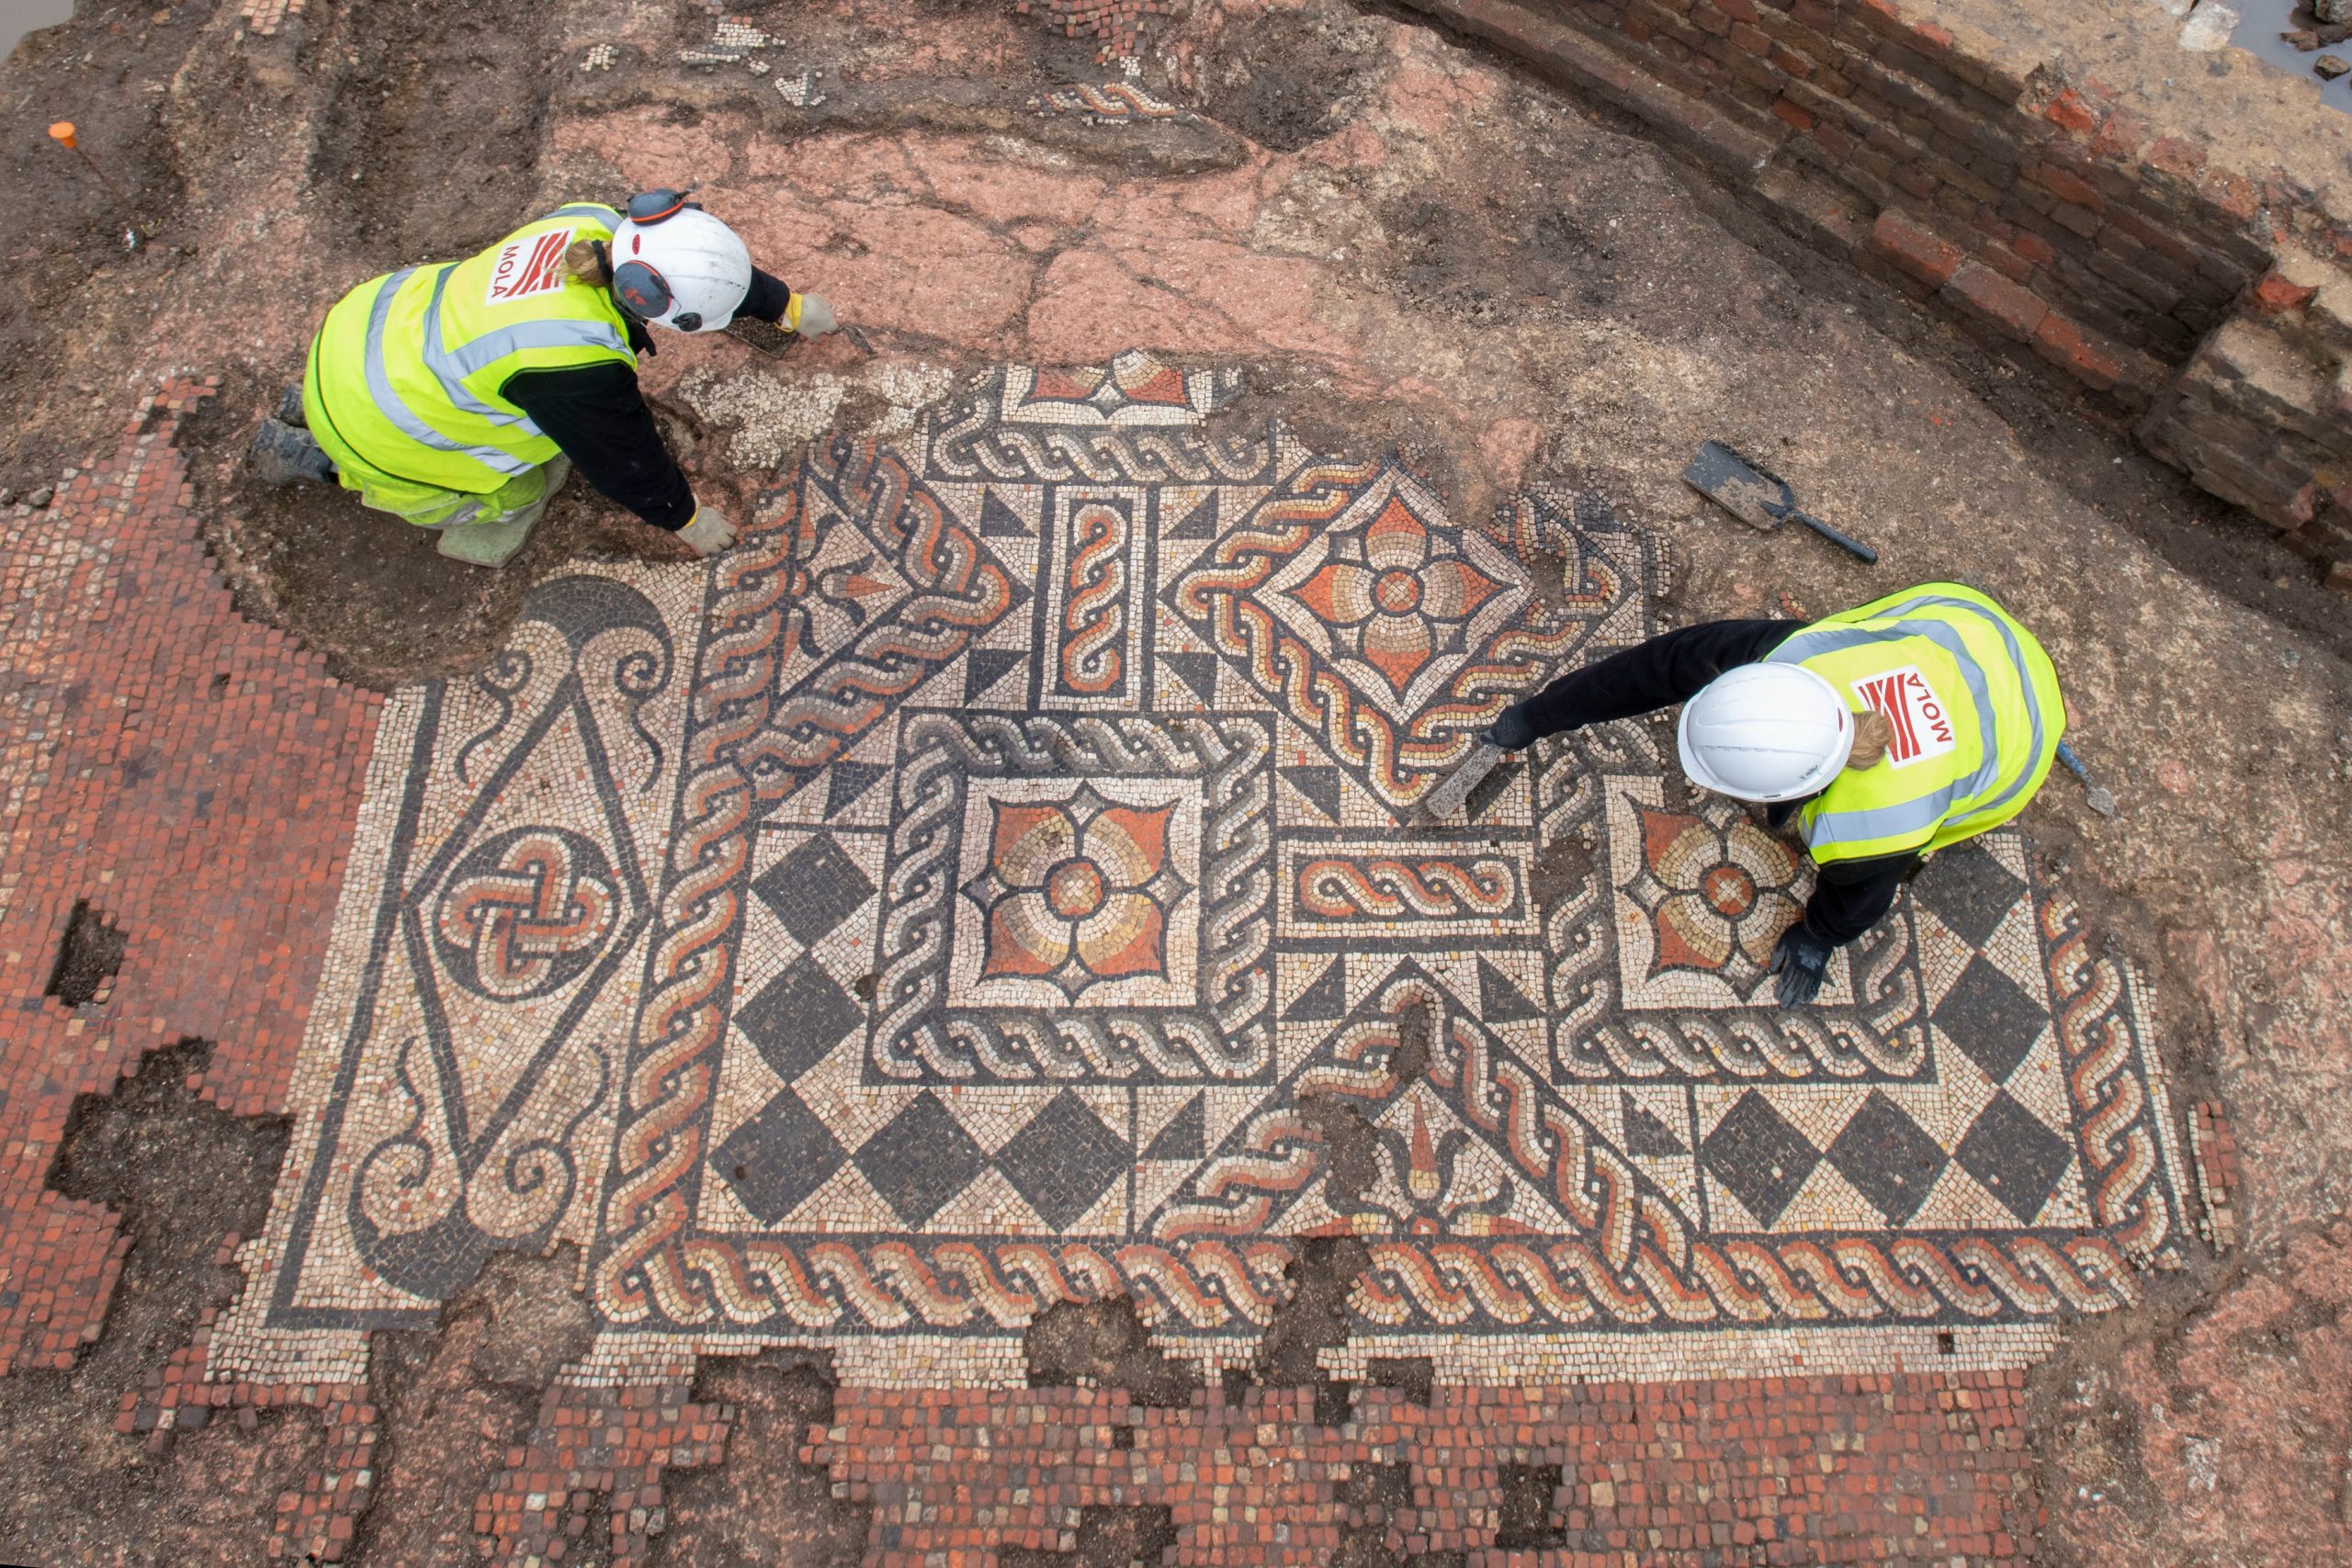 Archaeologists Uncover London’s Largest Roman Mosaic in 50 Years